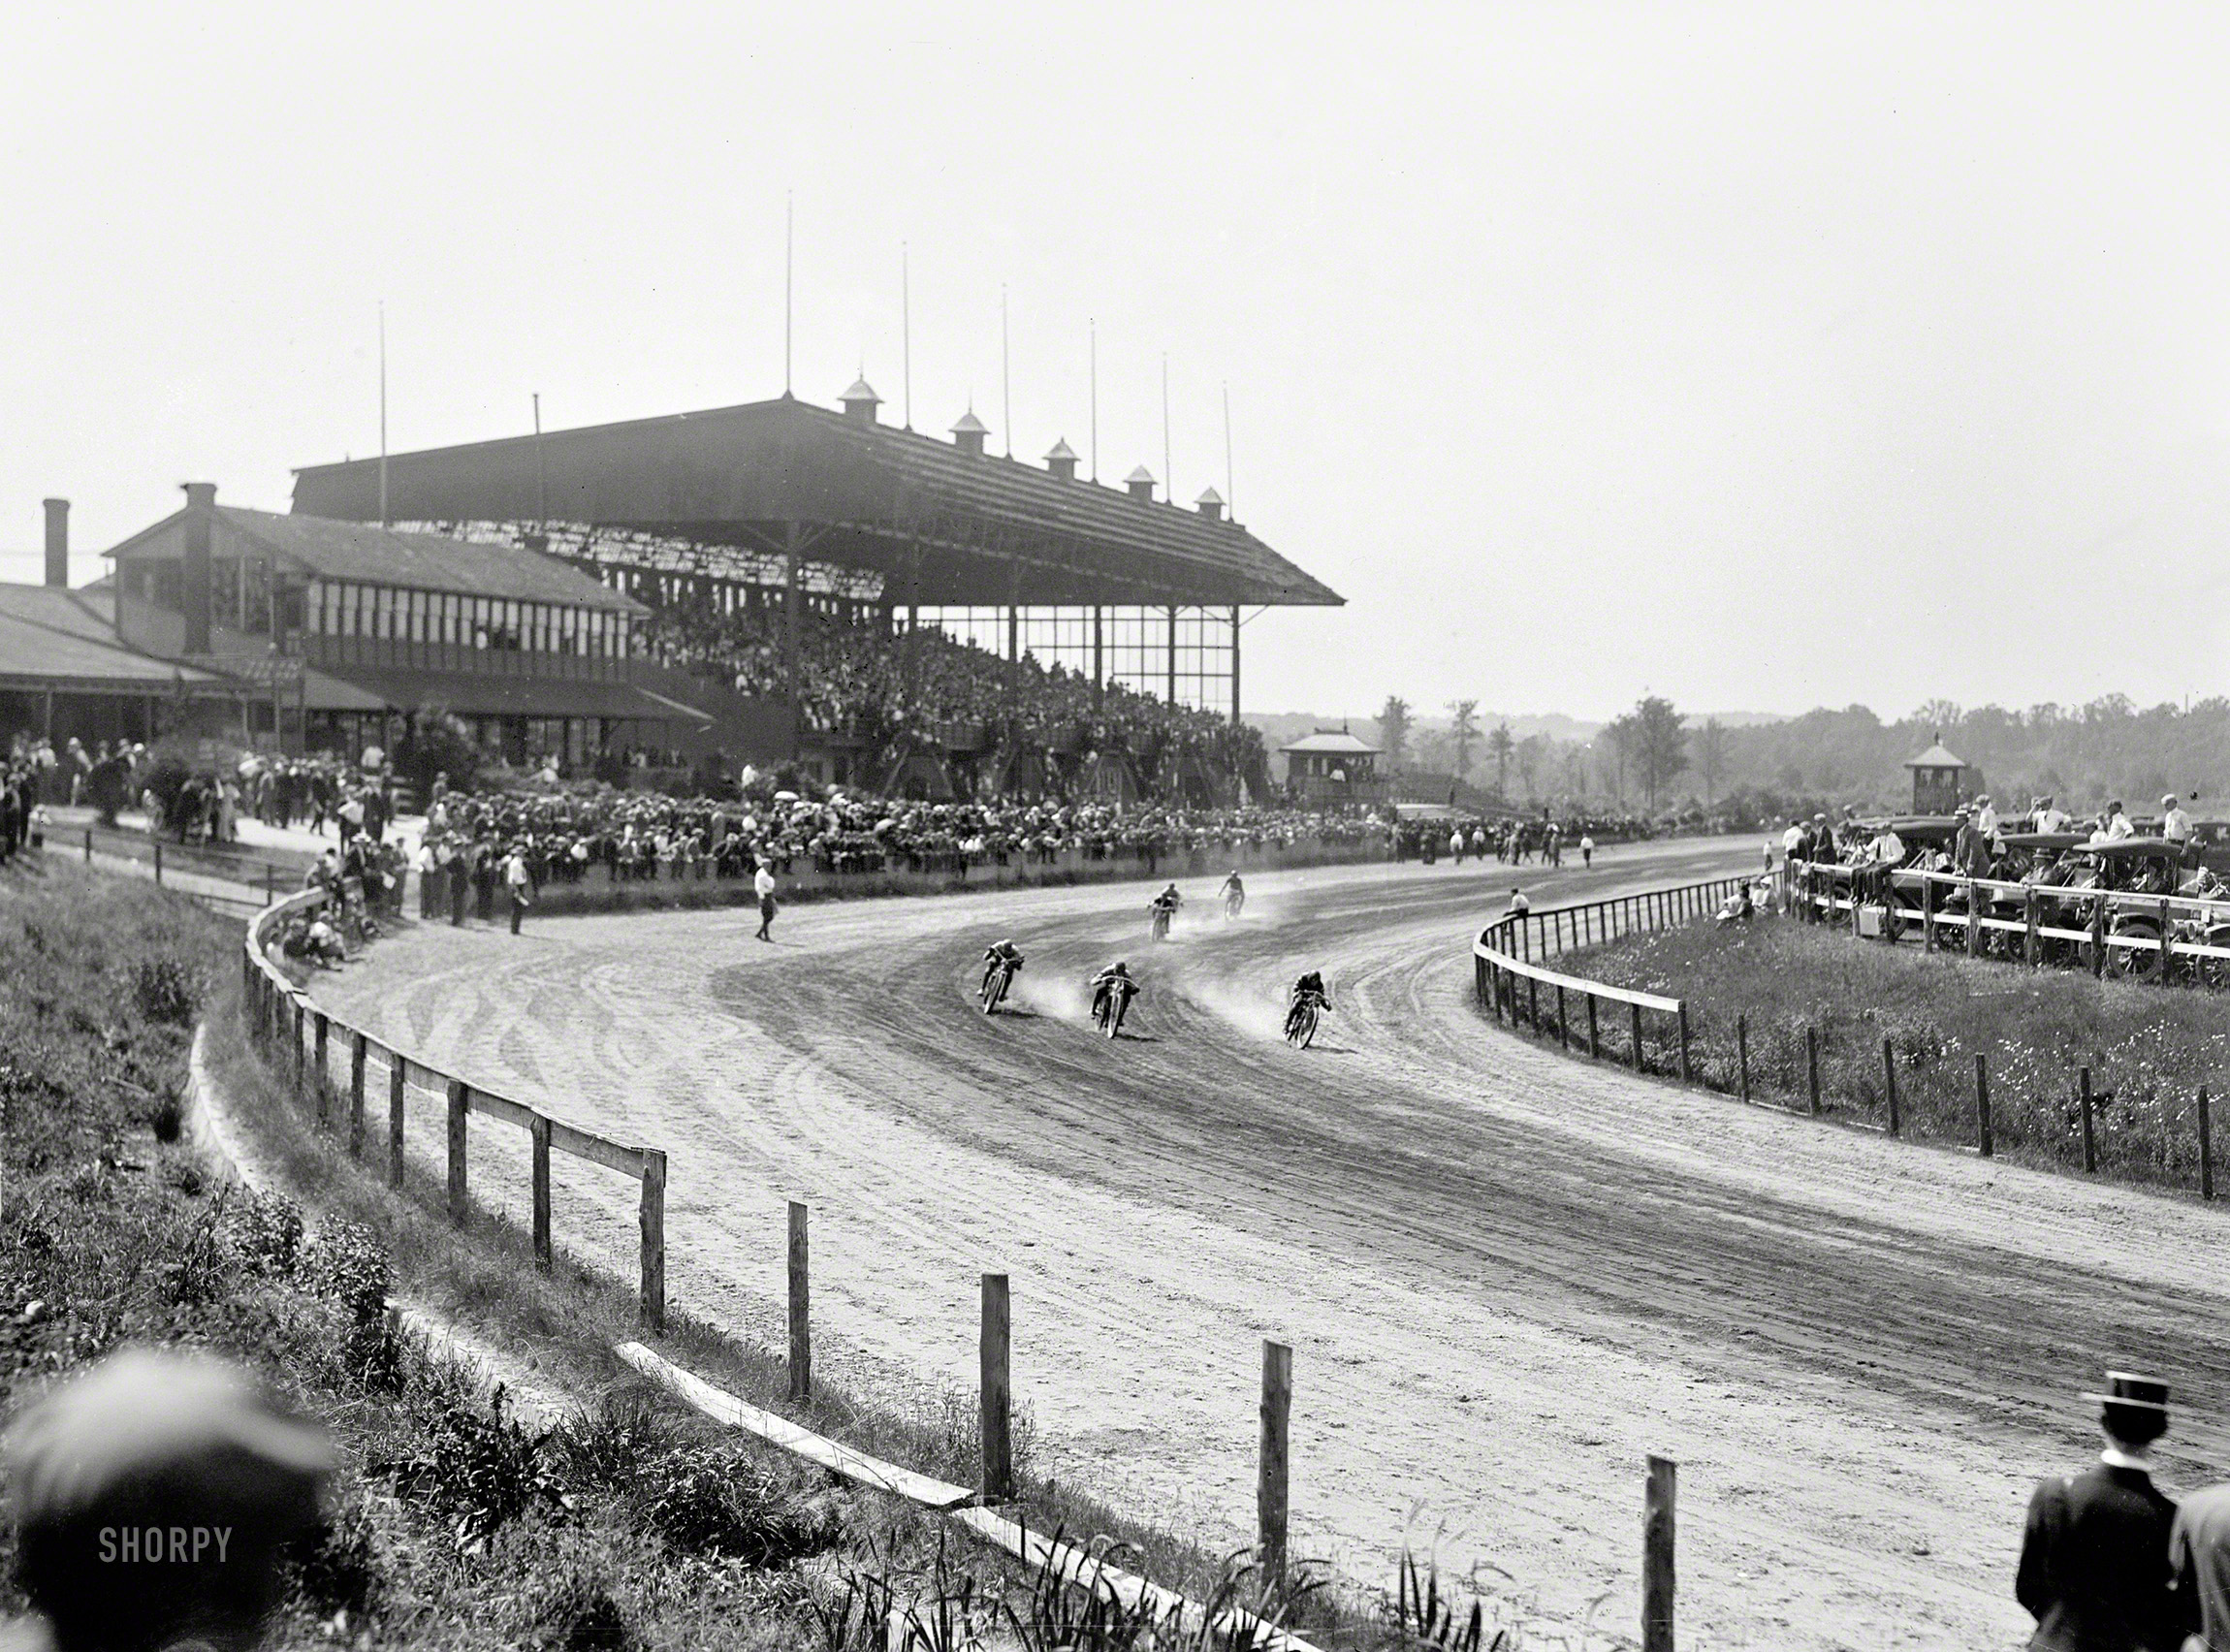 &nbsp; &nbsp; &nbsp; &nbsp; Motorcycle racing 103 years ago at the old Benning horse track in Washington.
May 30, 1912. "National Capital Motorcycle Club -- Decoration Day motor races at Benning track." National Photo Company glass negative. View full size.